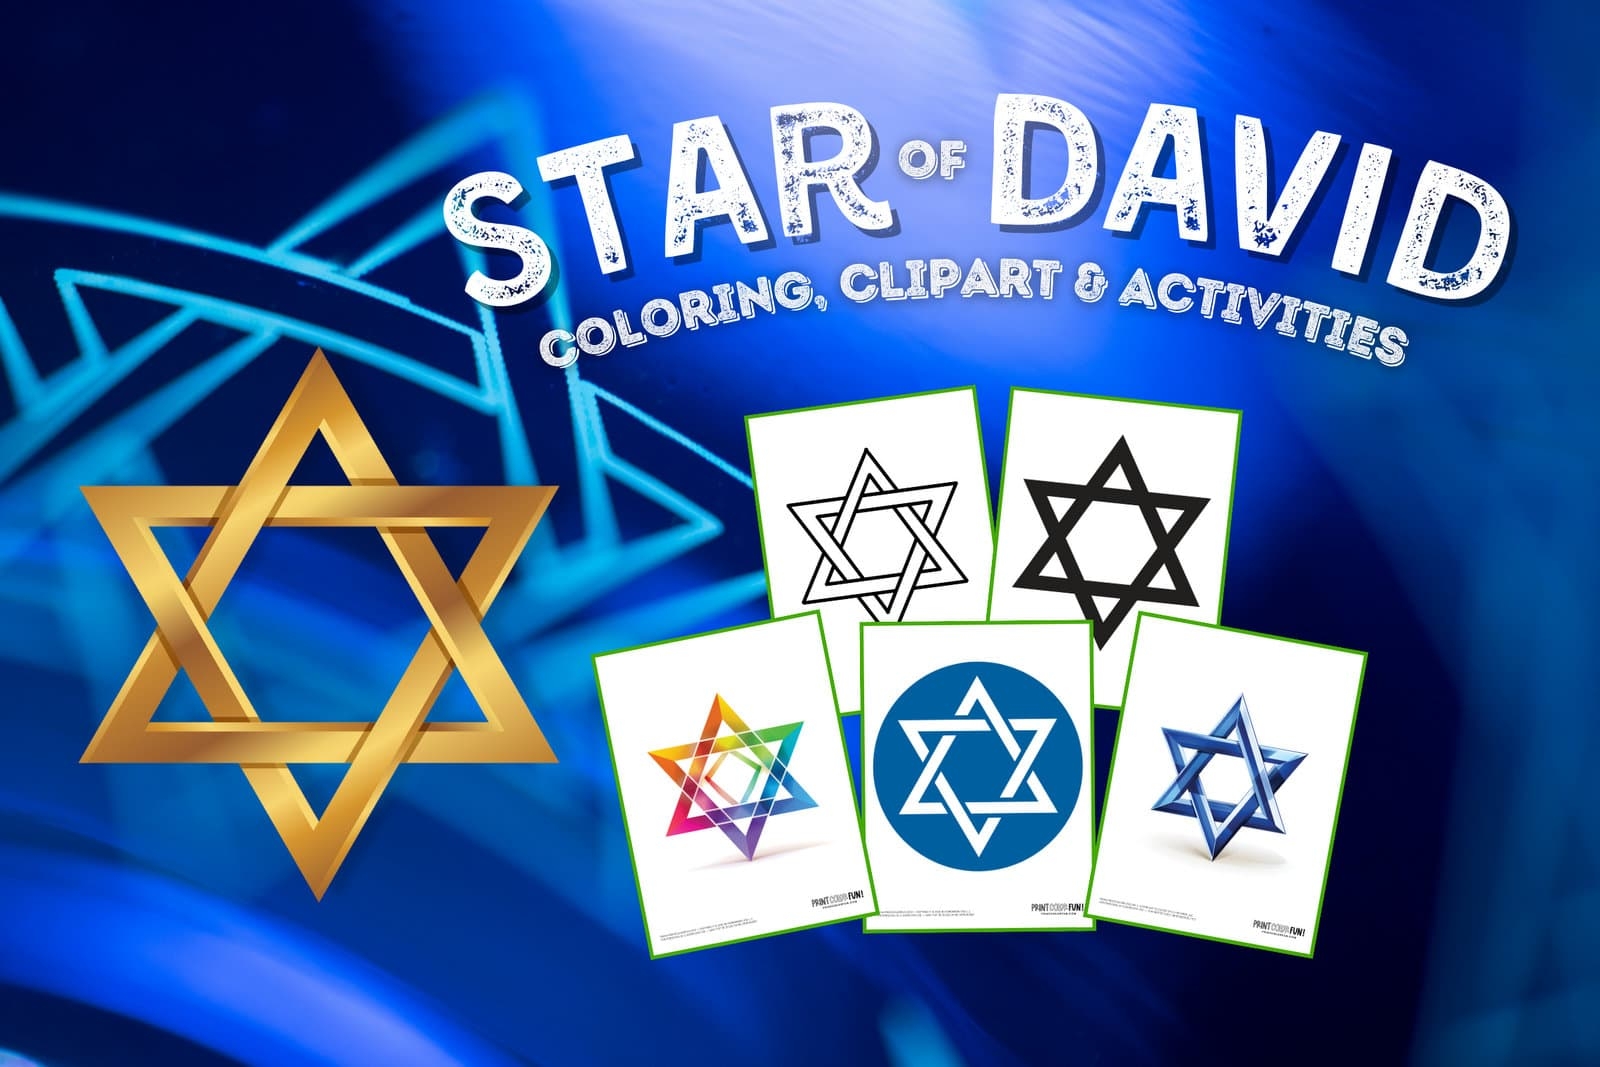 21 Star Of David Clipart Pages For Creative Learning At PrintColorFun